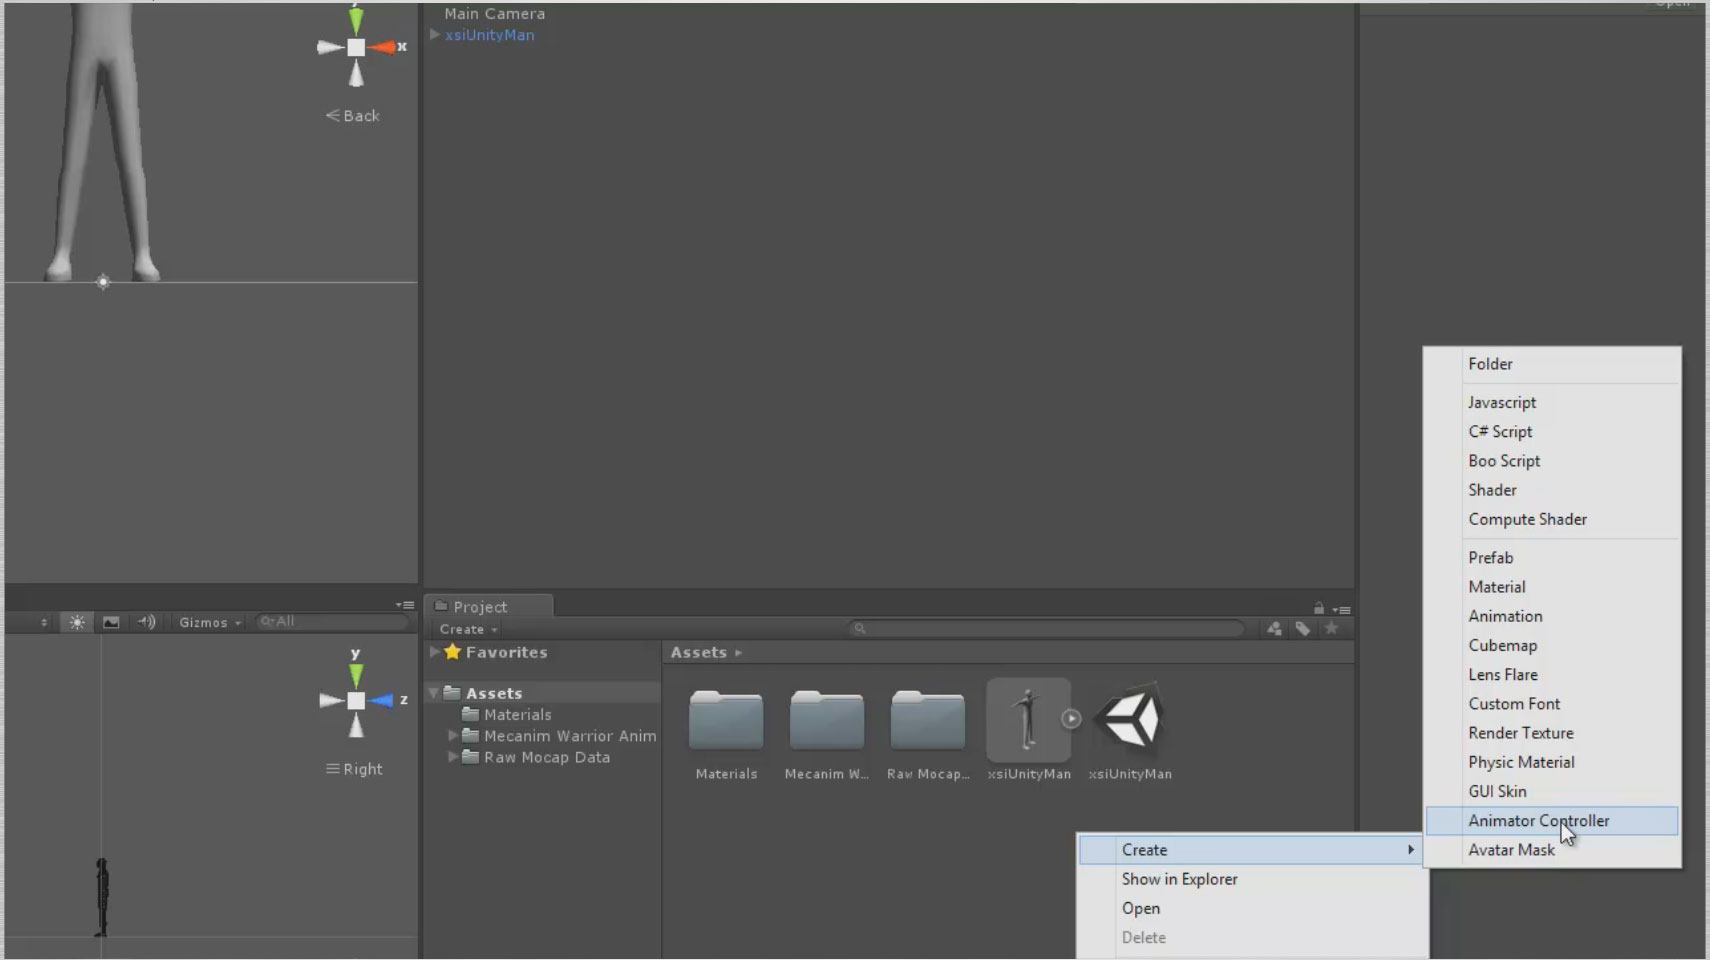 Create a new animation controller